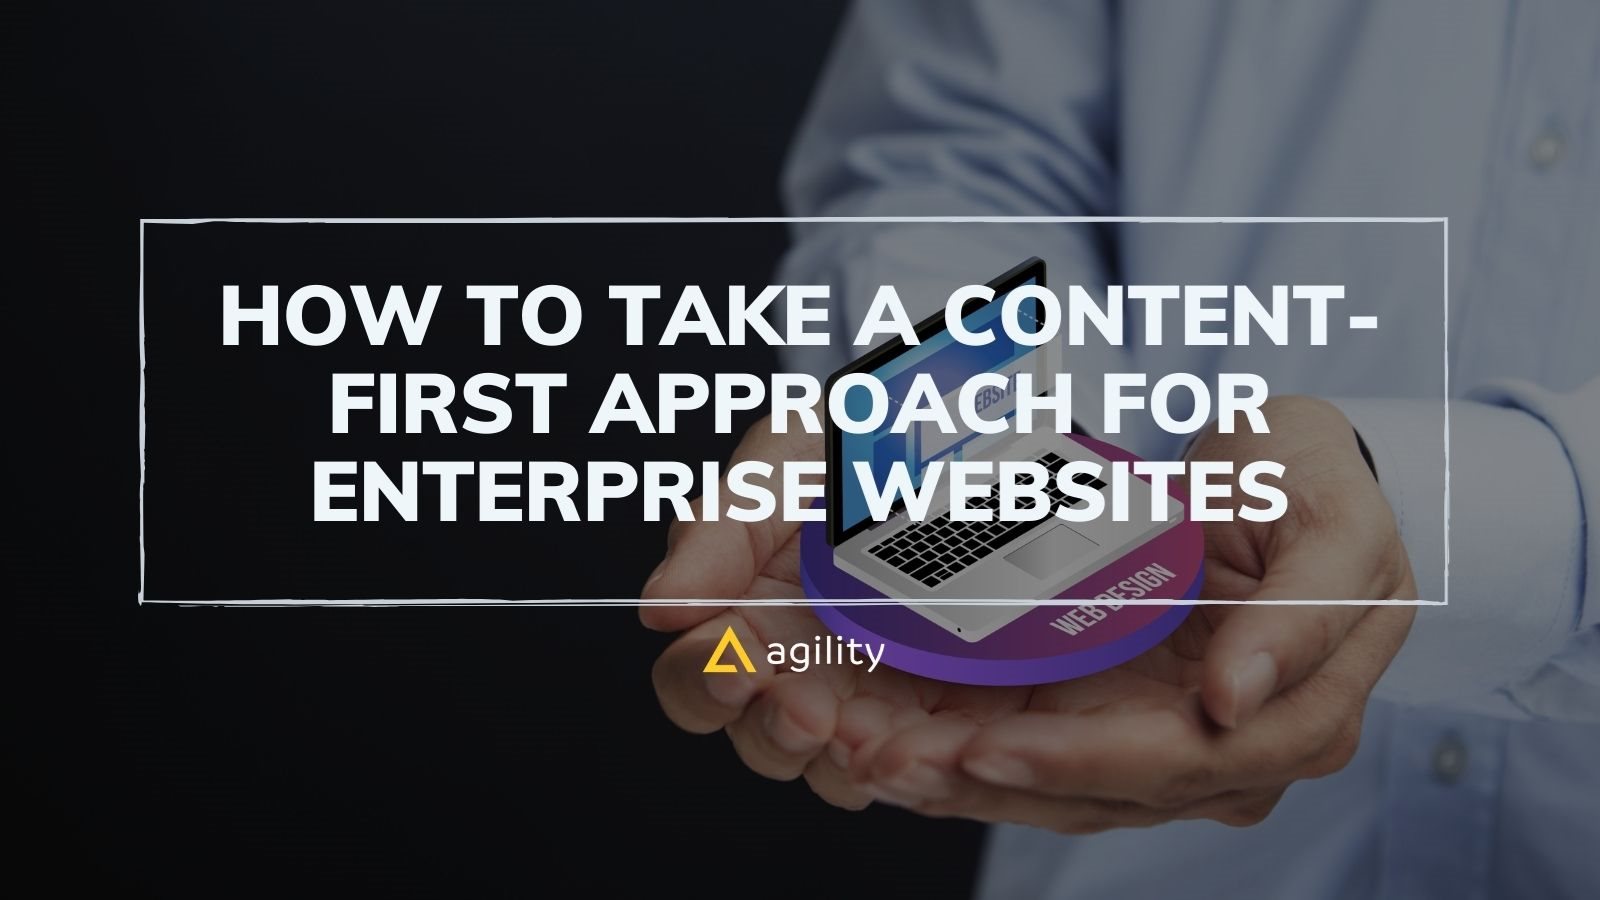 Content-First Approach for Enterprise Websites on agilitycms.com